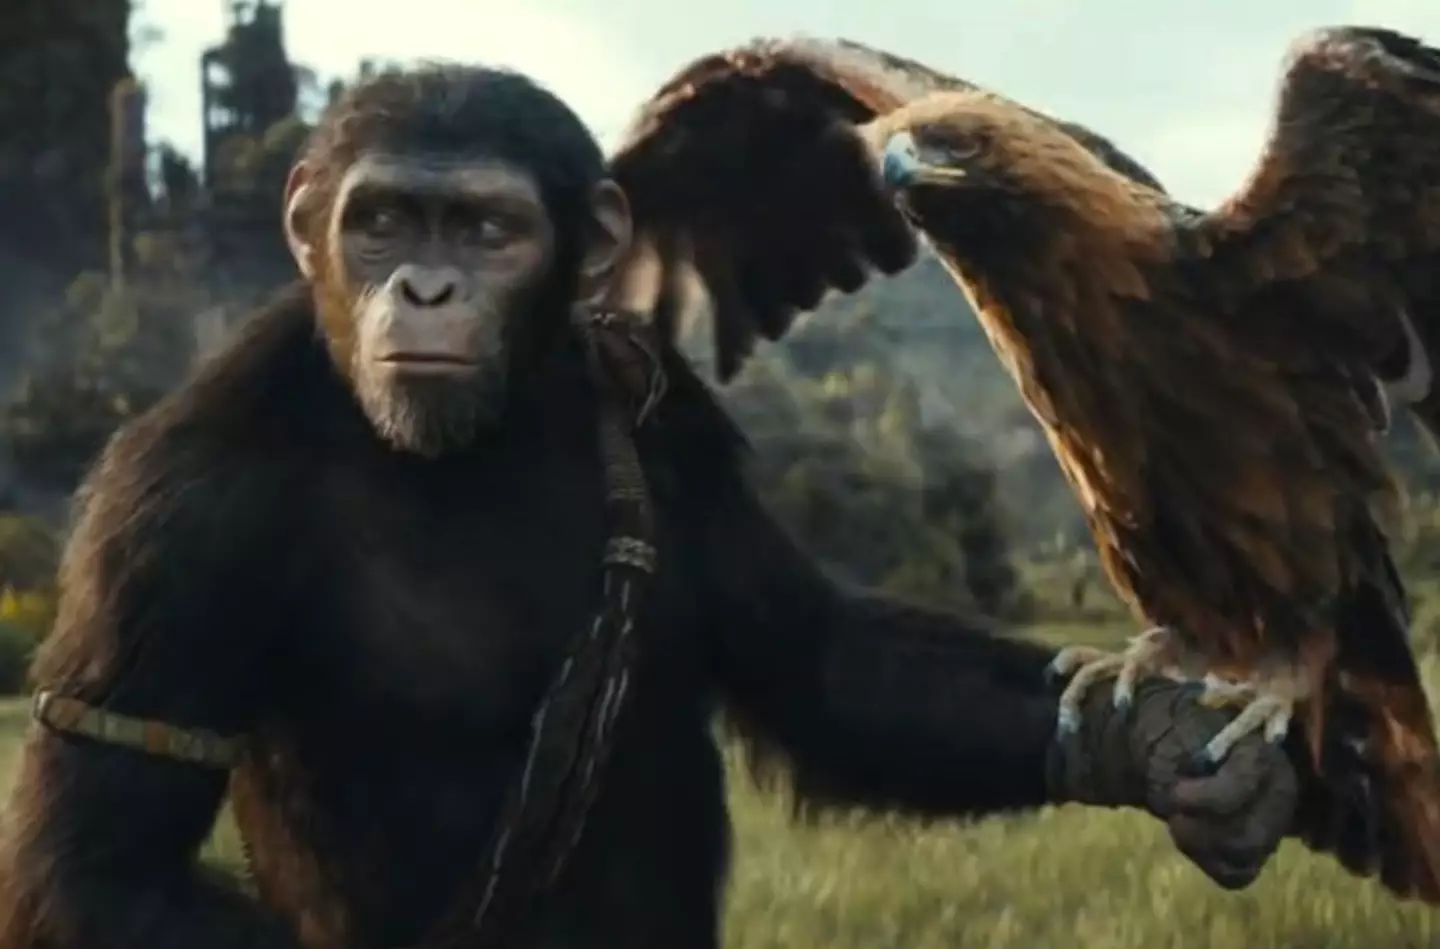 The first trailer for Kingdom of the Planet of the Apes has been release.